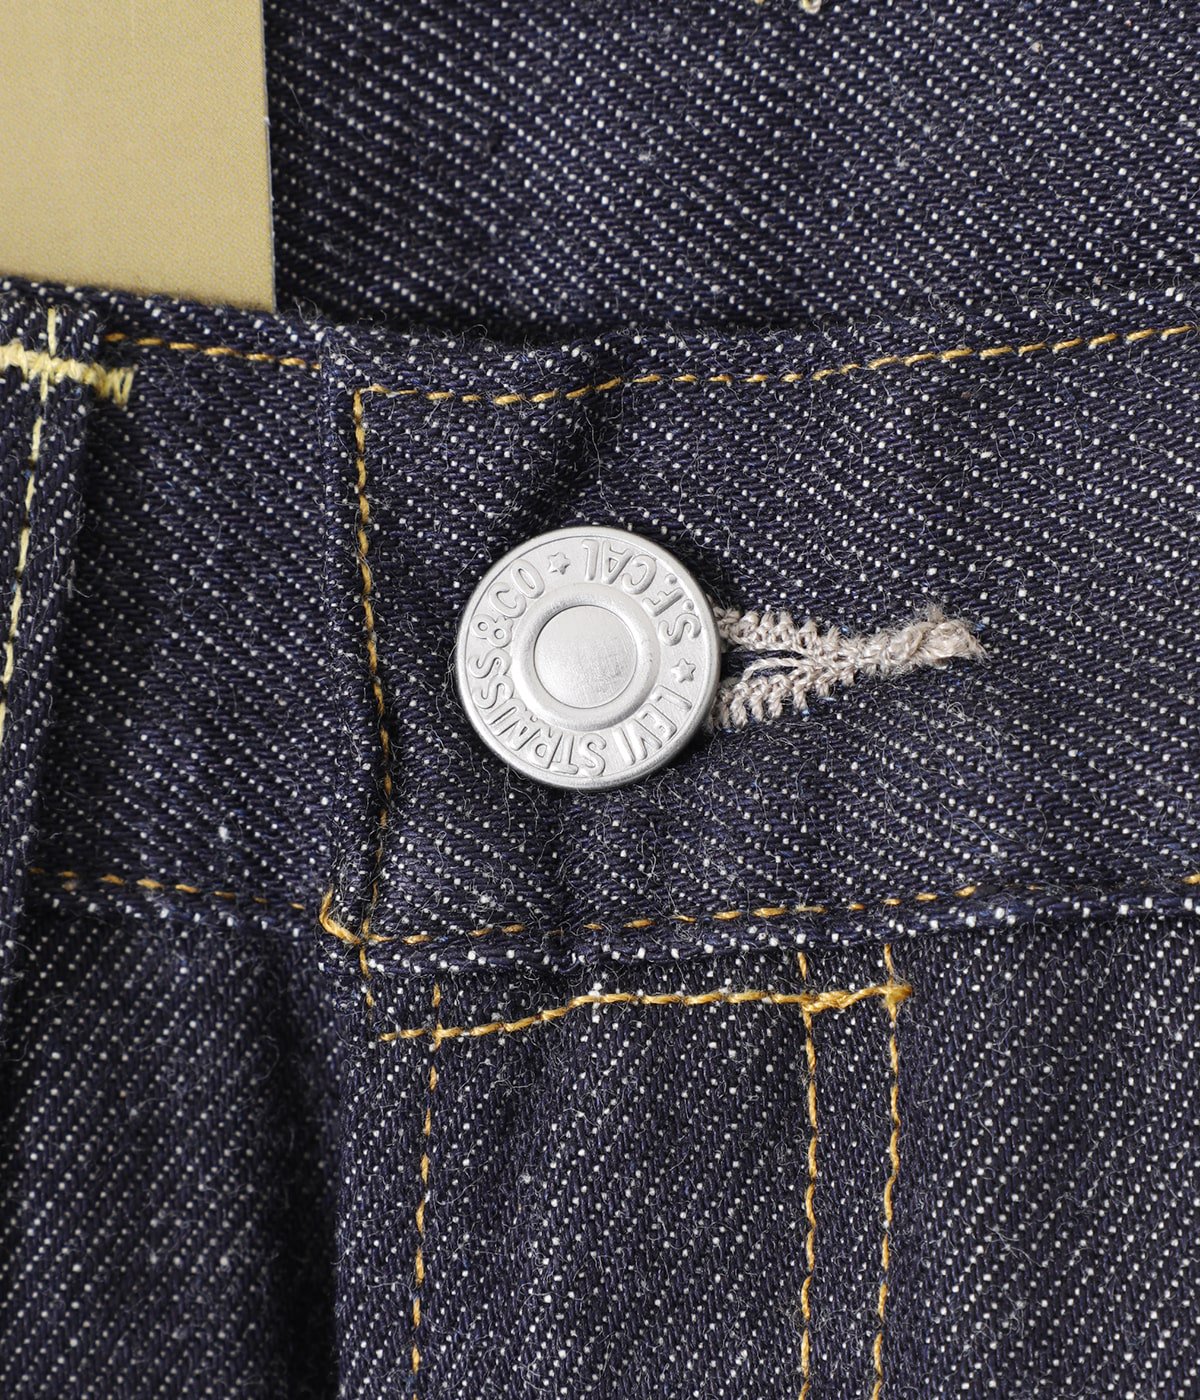 1954 501 JEANS